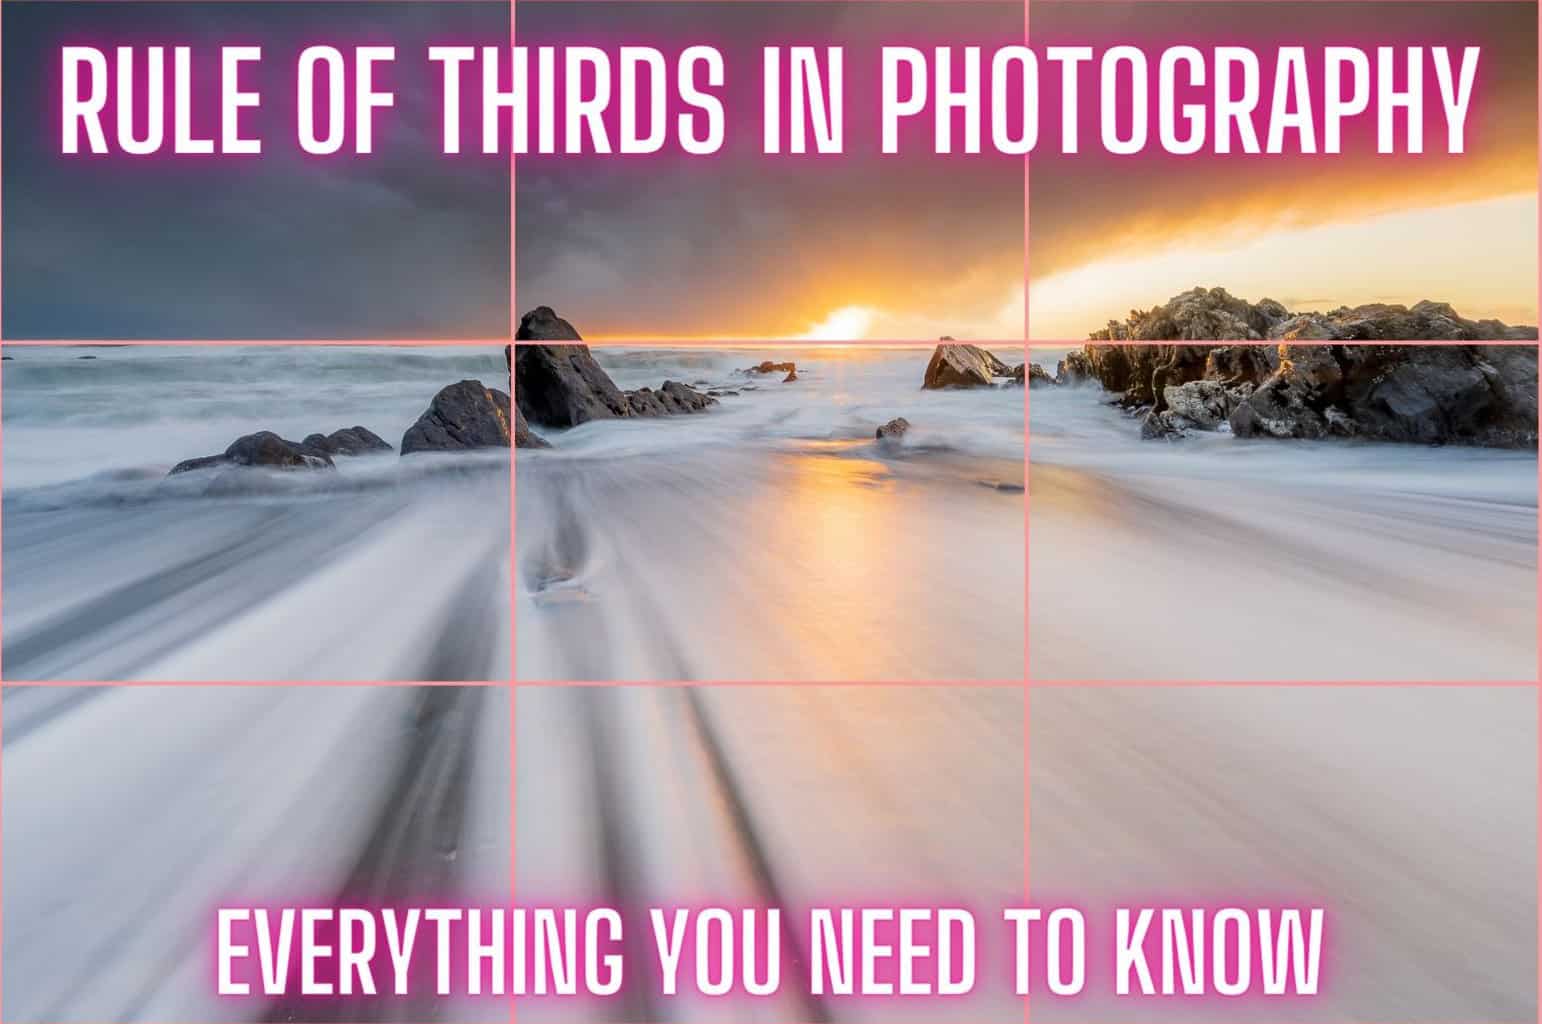 Photography rule of thirds example